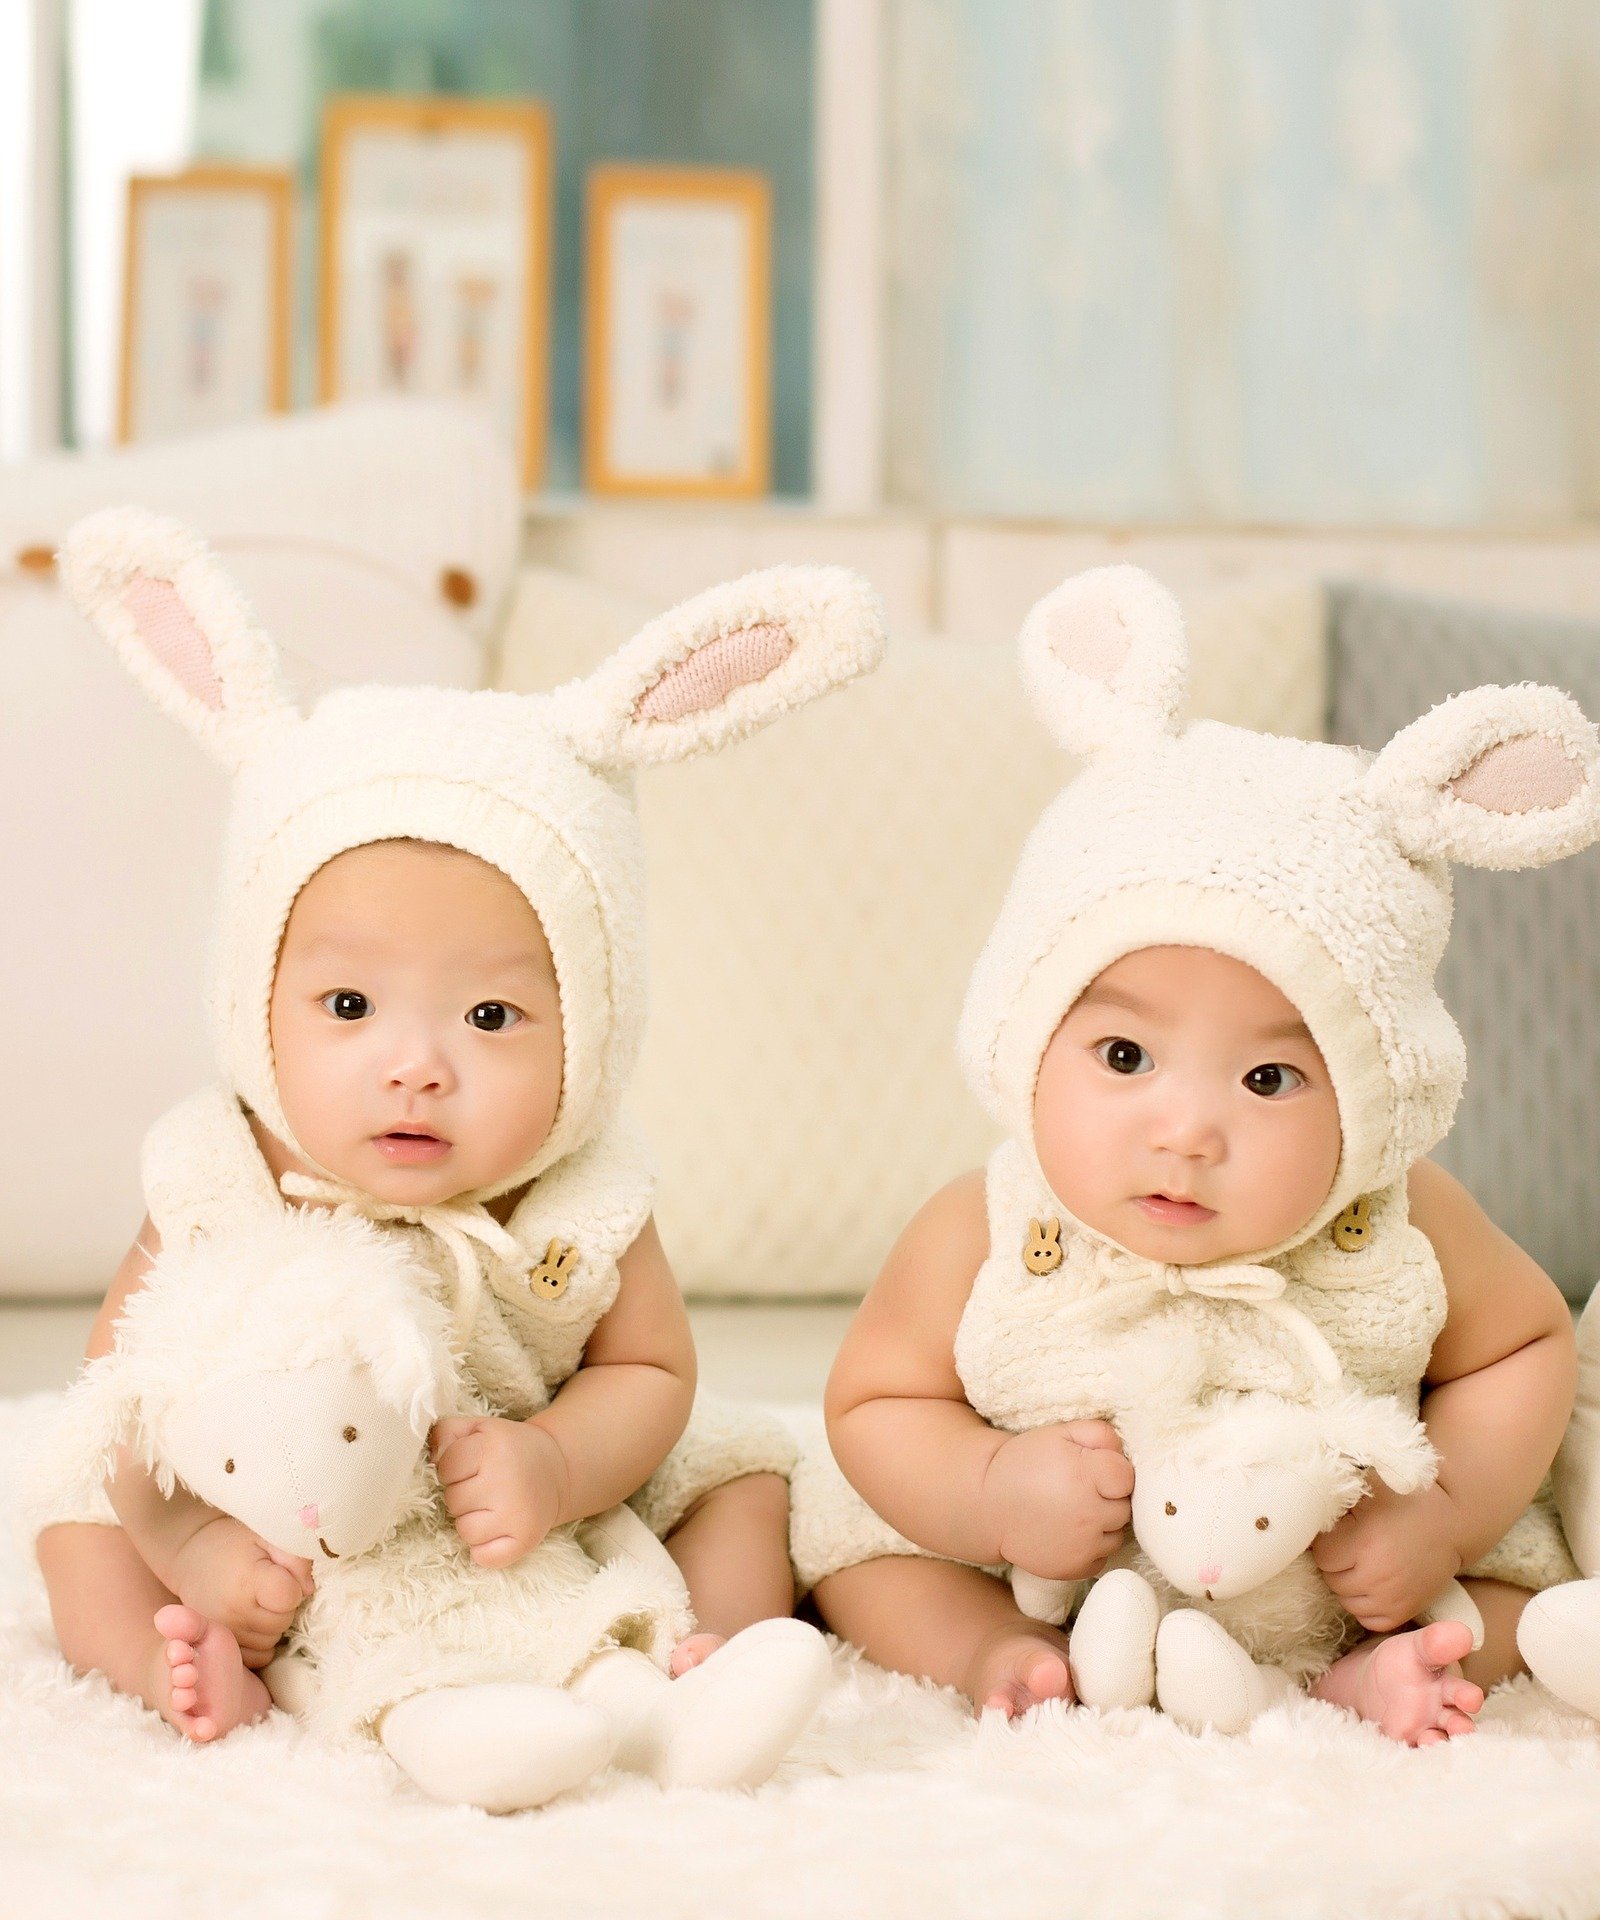 Pictured - A photo of twins wearing bunny outfits and holding on to their toys | Source: Pixabay 